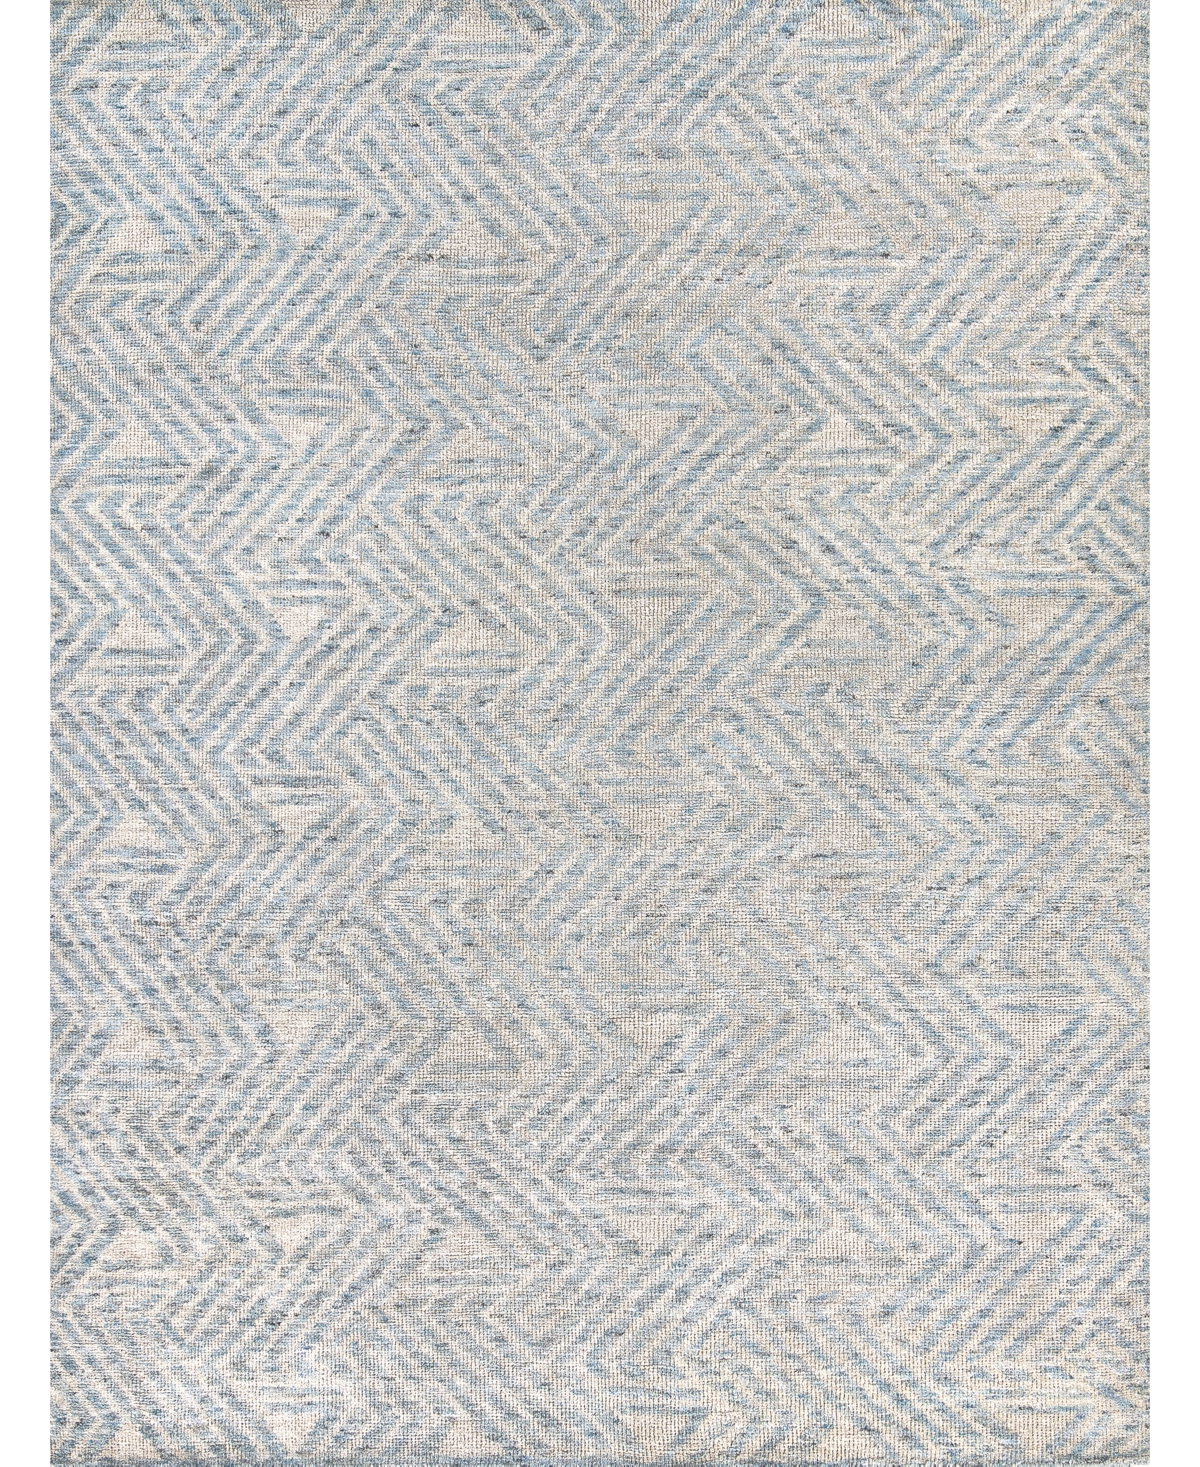 Exquisite Rugs Eaton ER4038 8' x 10' Area Rug - Blue, Ivory